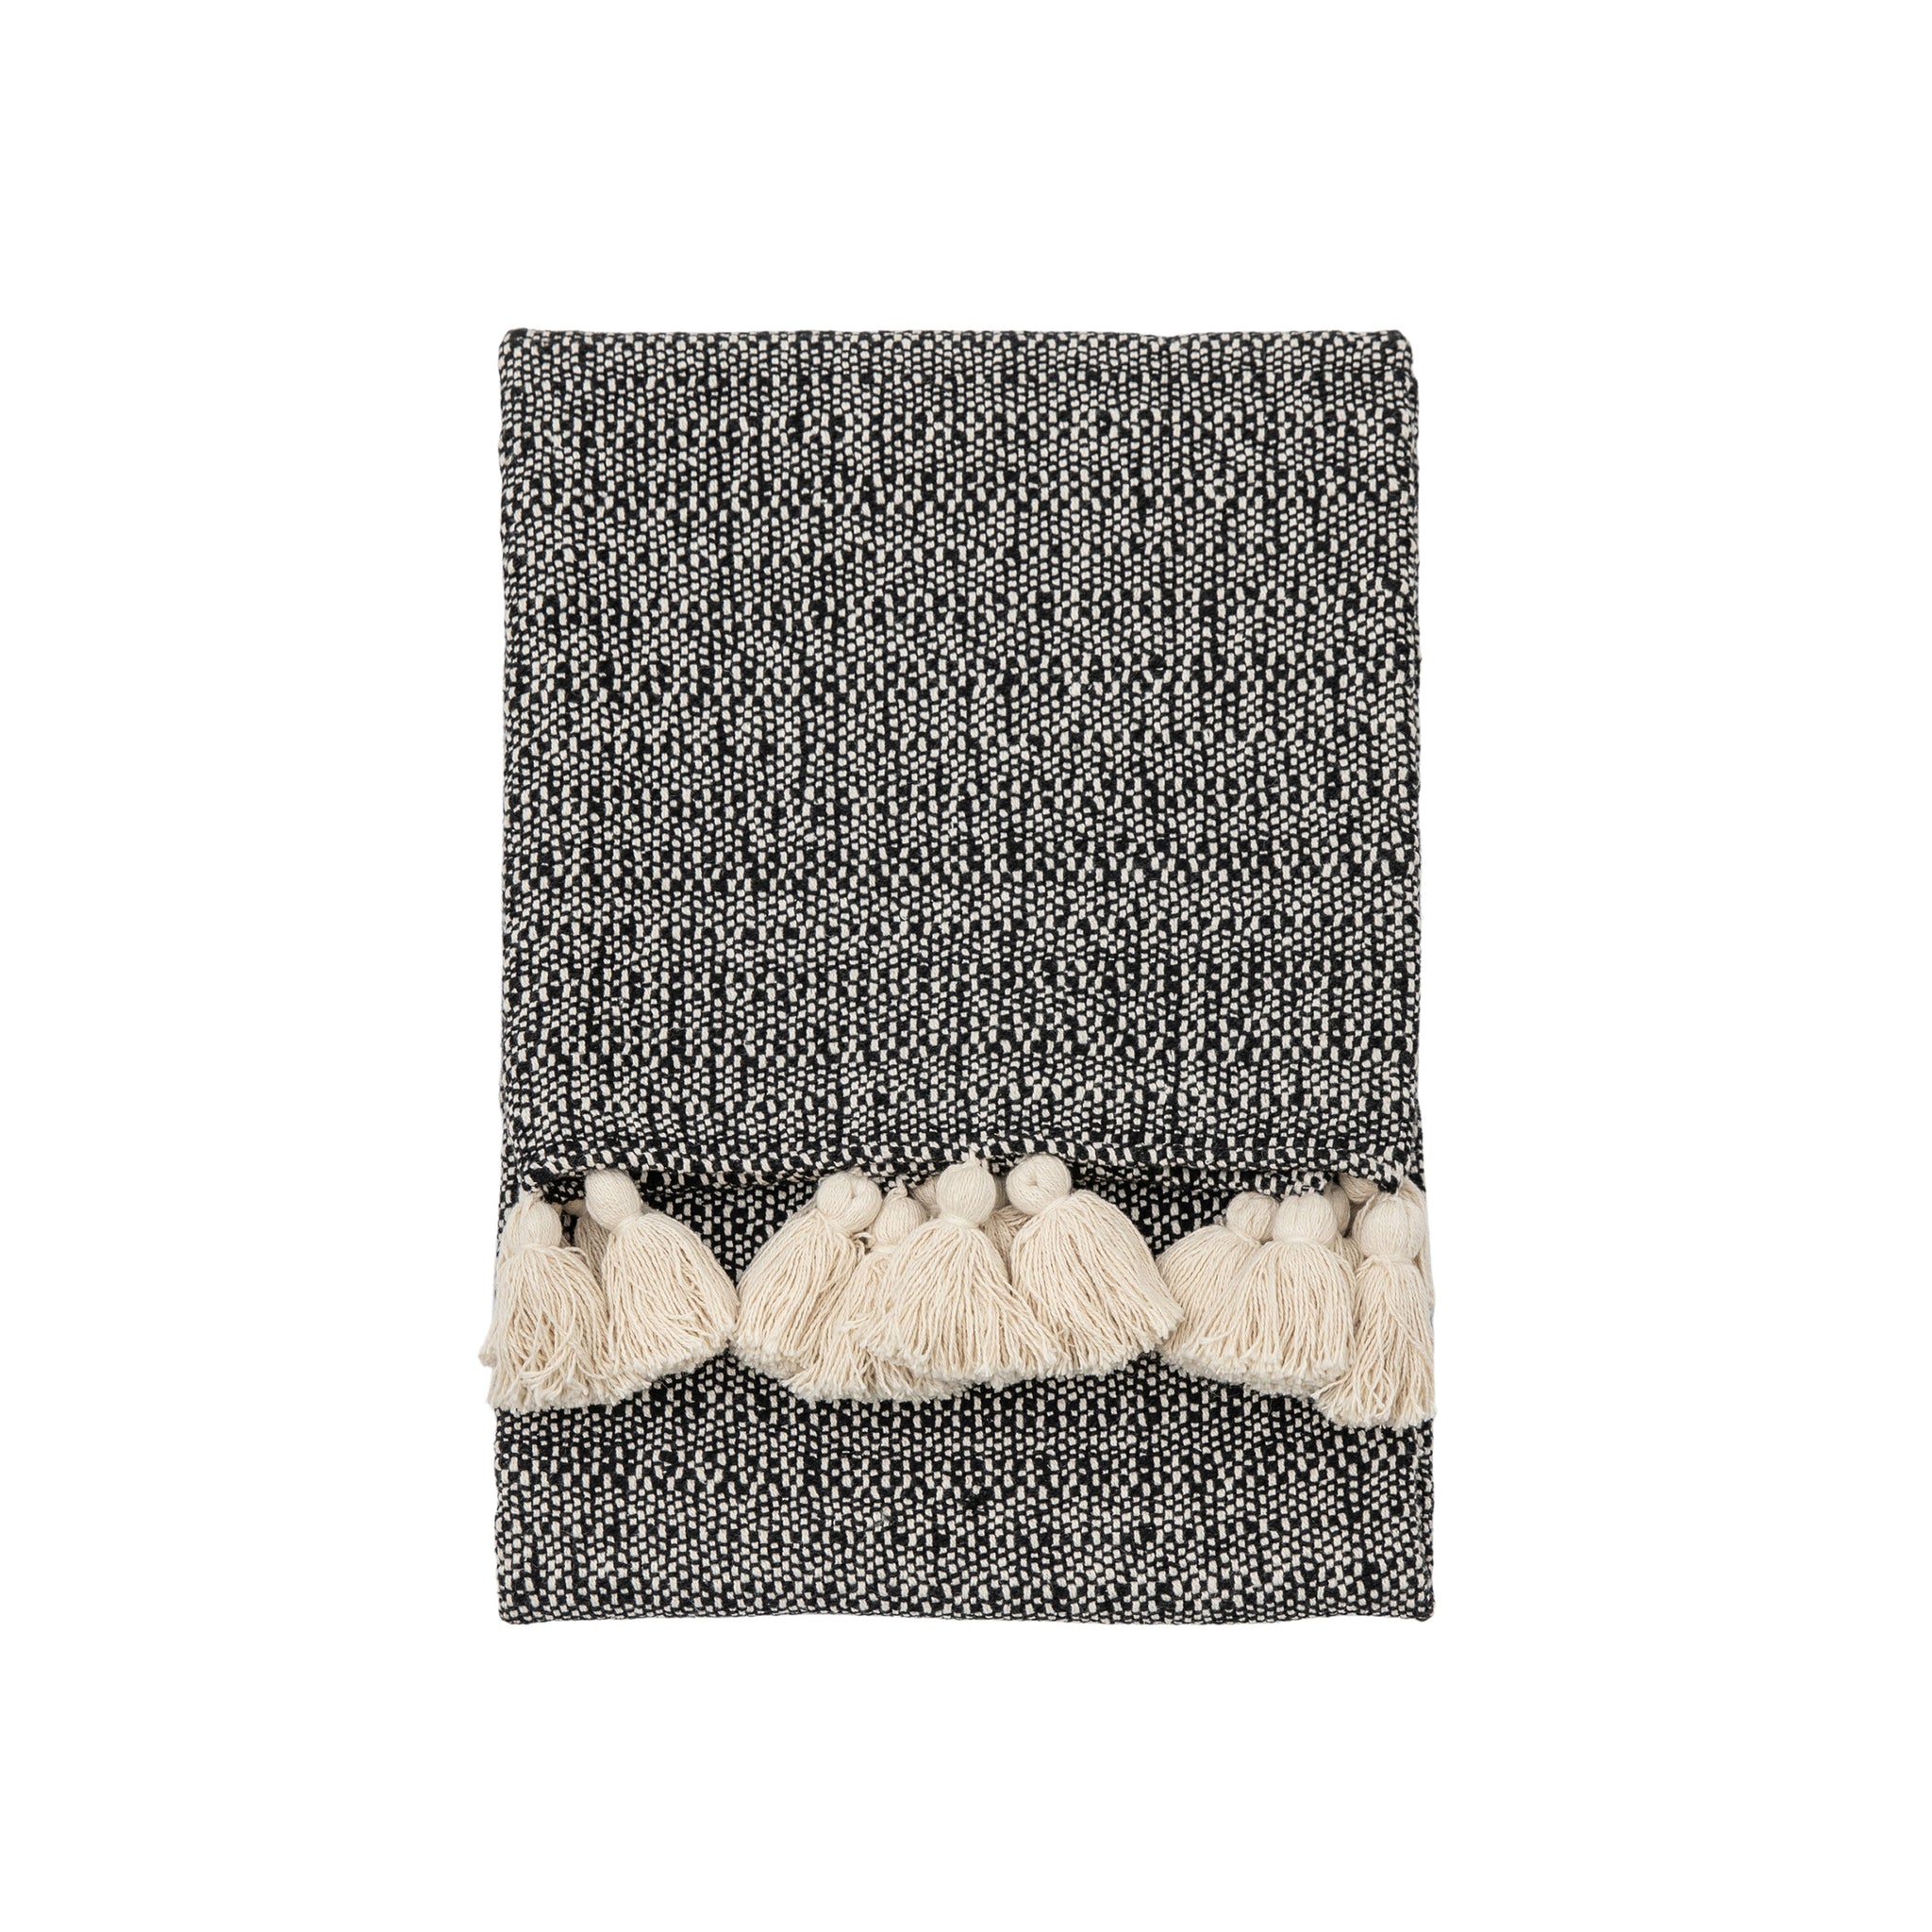 Woven Throw With Tassels Black